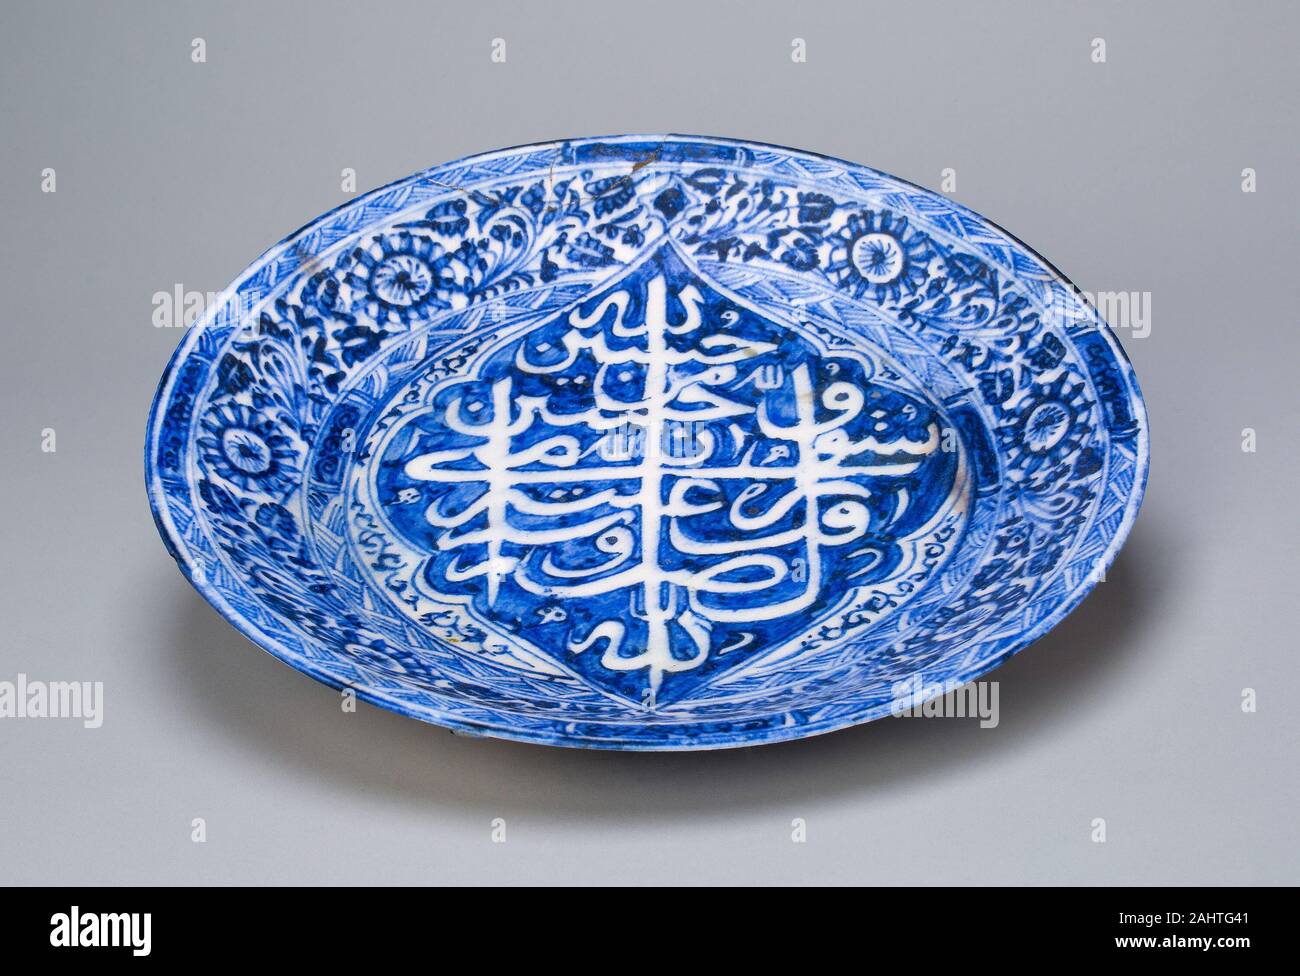 Islamic. Dish. 1822–1823. Iran. Fritware, painted in blue under a transparent glaze The color palette and naturalistic designs of this dish are a testament to the enduring influence of Chinese porcelain on ceramics of the Islamic world. This dish features floral decorations in a naturalistic Chinese style and the traditional blue-and-white color scheme. The central calligraphic motif of the dish, offering pious sayings, is written in Arabic script, but its shape recalls Chinese characters. Chinese influence on Islamic ceramics can be seen as early as the 9th century, and it continued well into Stock Photo